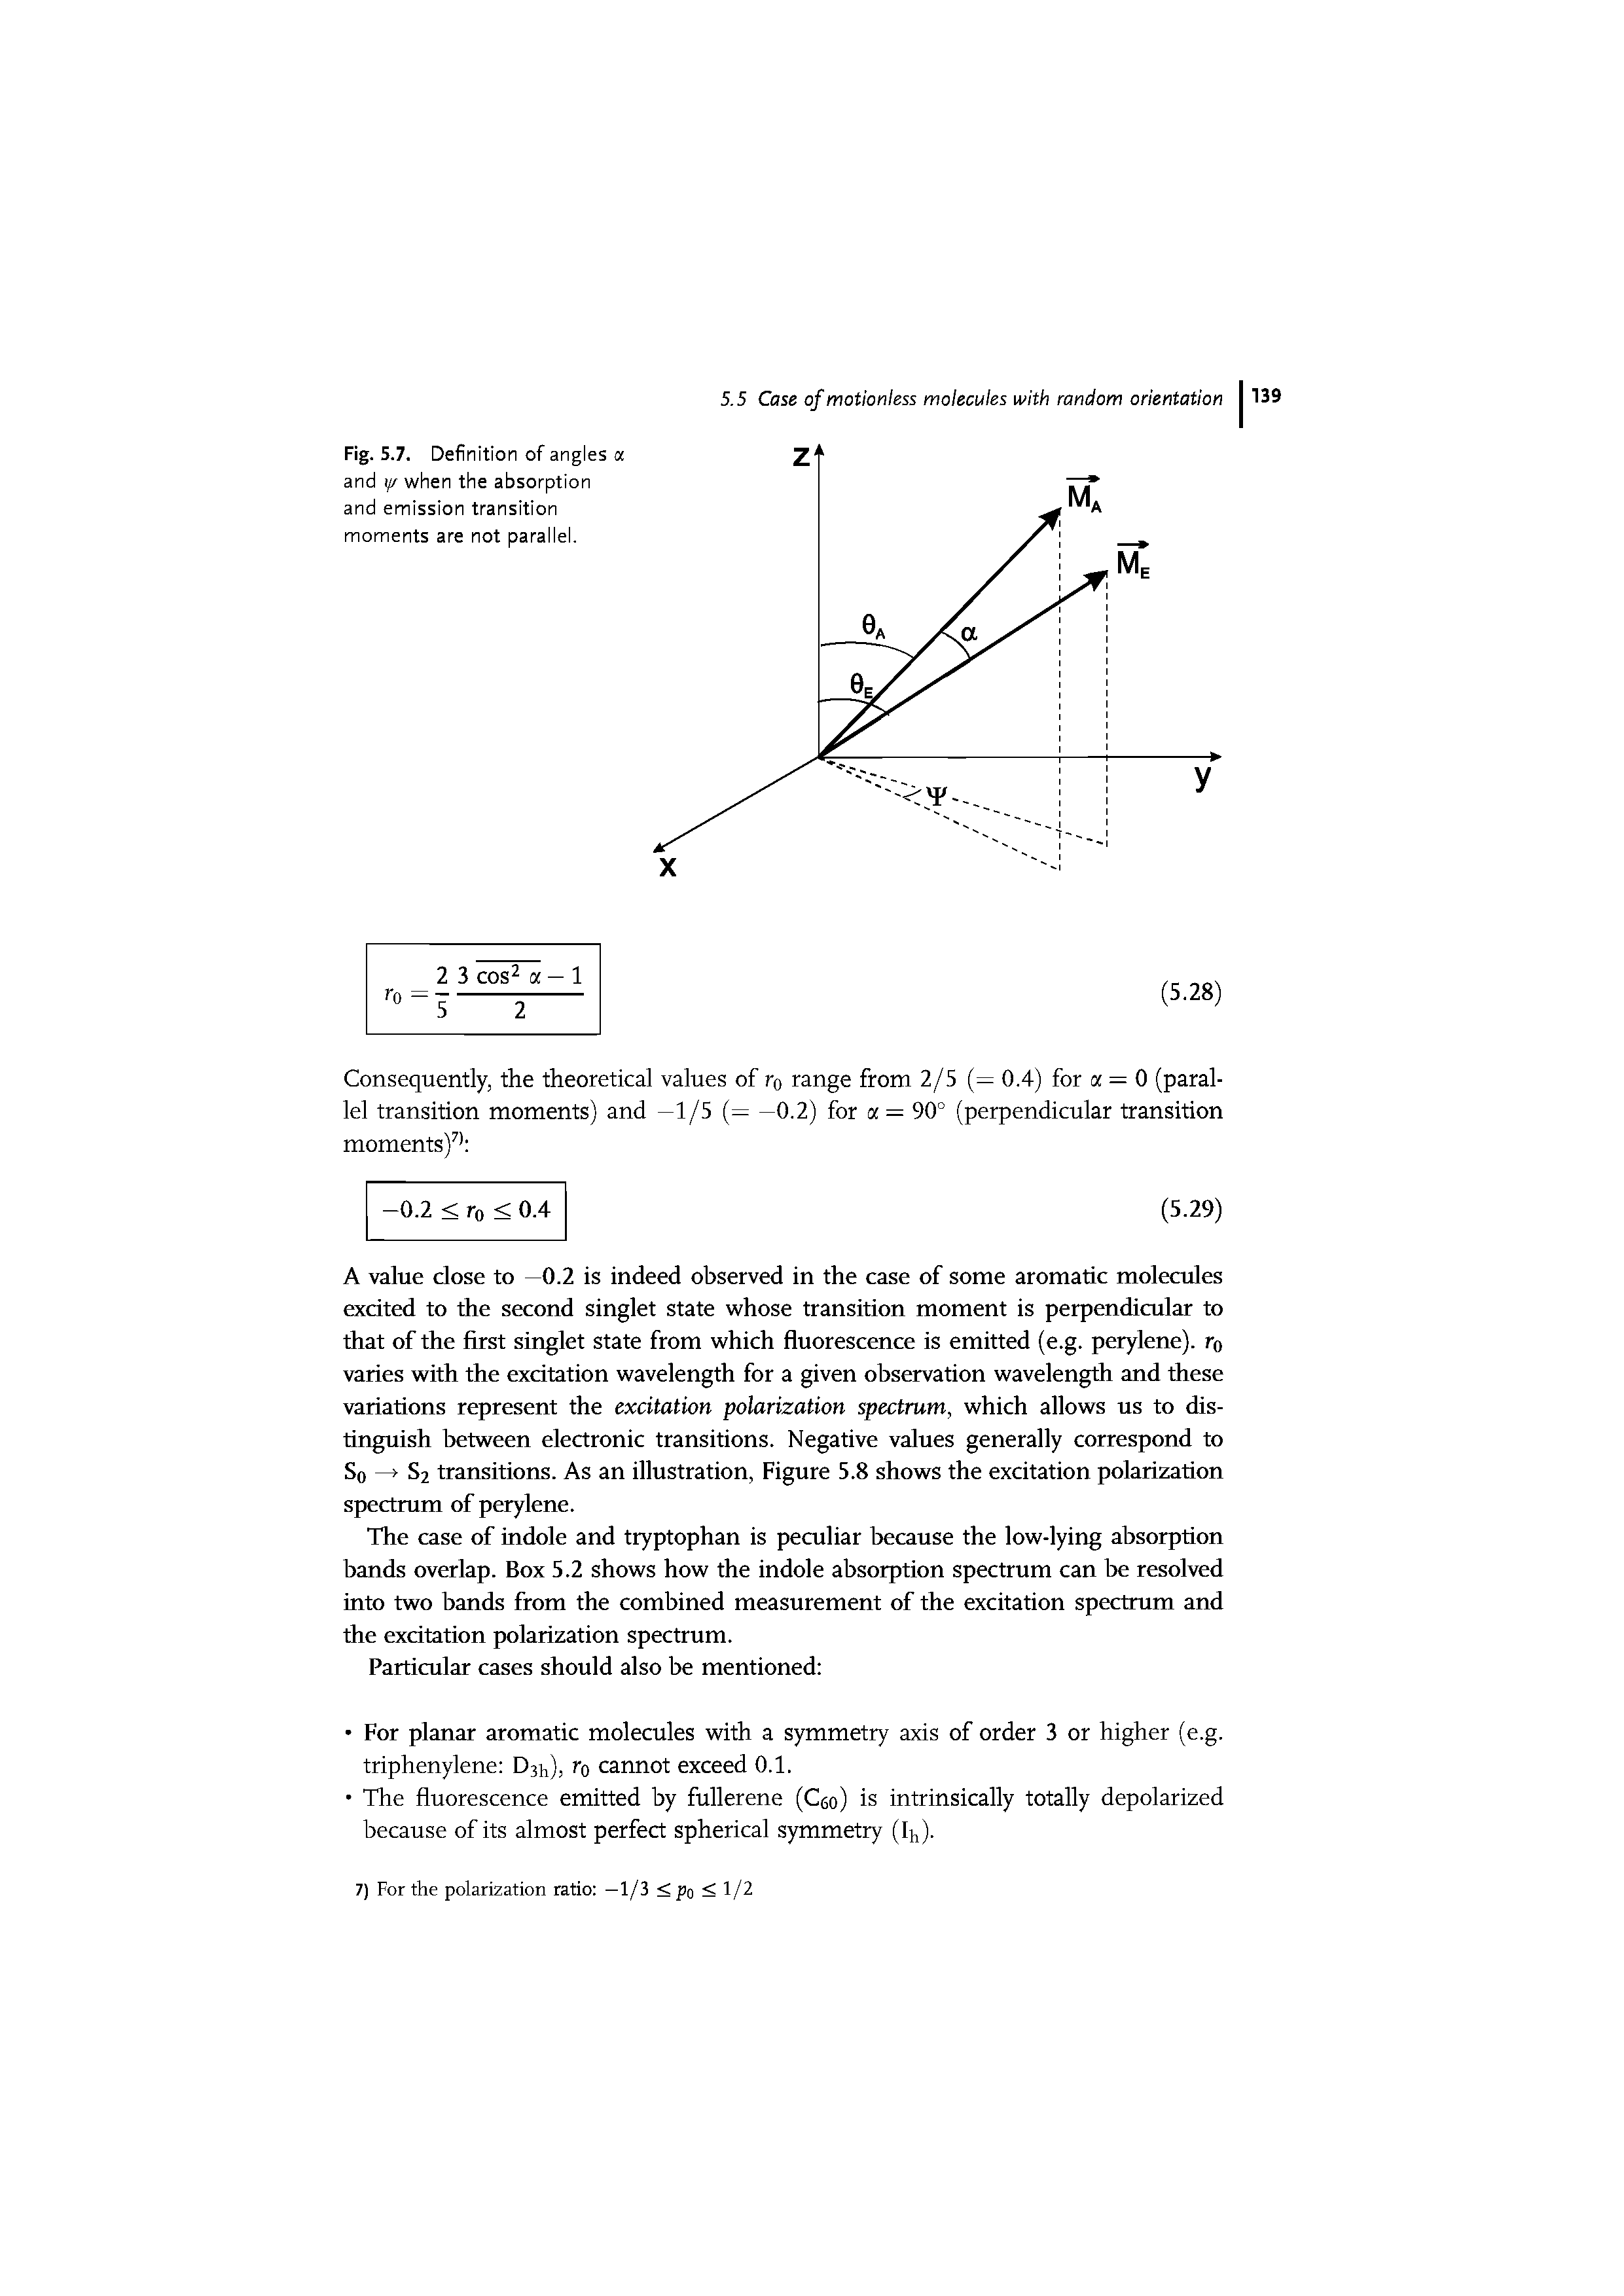 Fig. 5.7. Definition of angles and yr when the absorption and emission transition moments are not parallel.